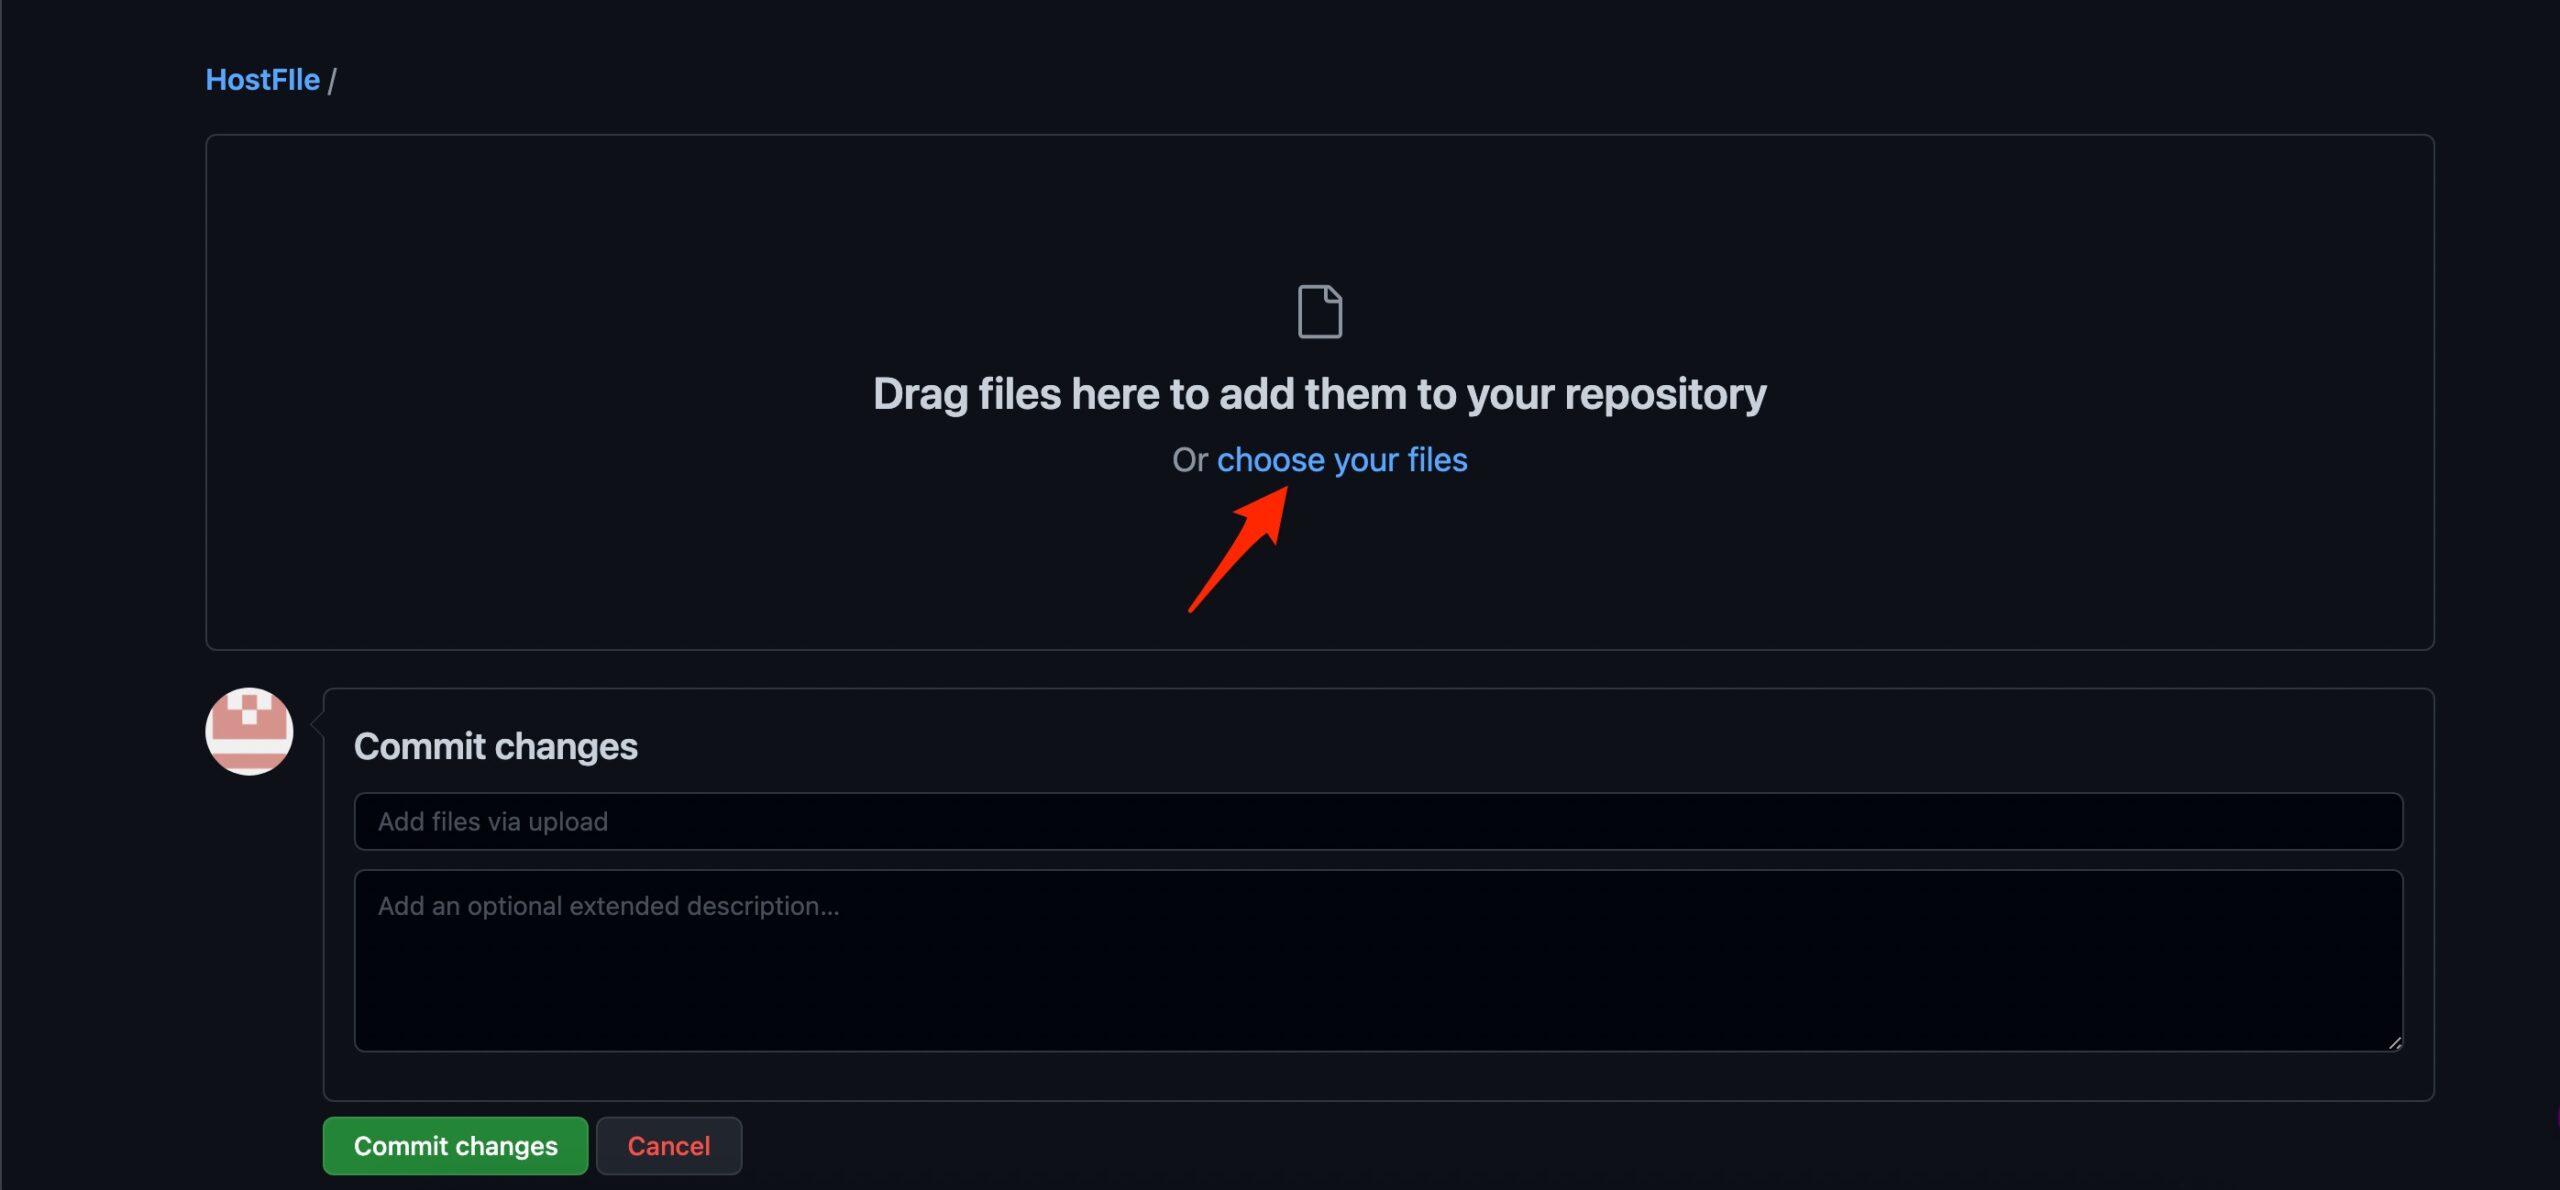 Drag the file or upload it to the repo